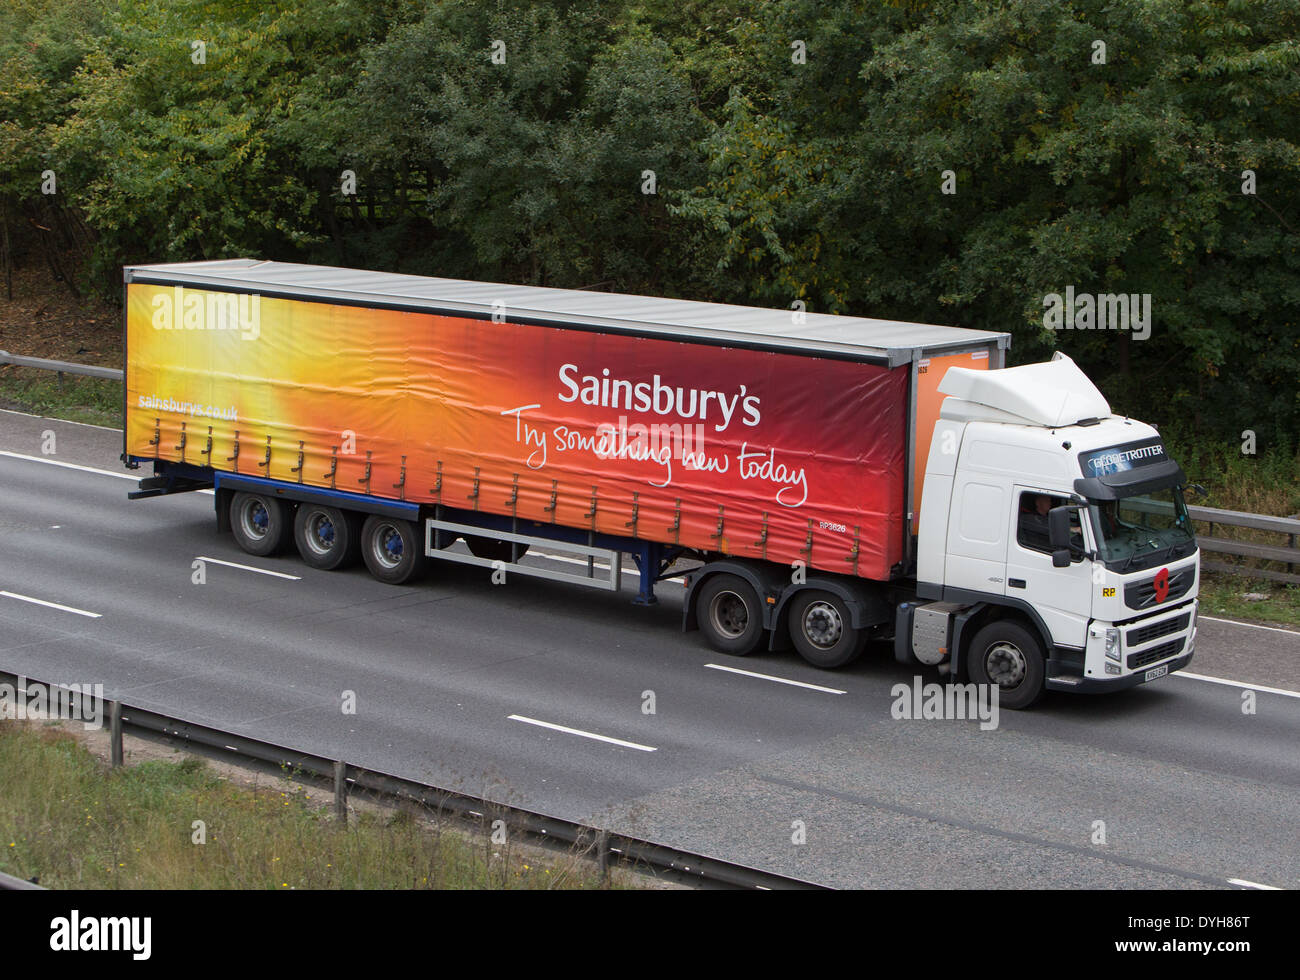 Sainsbury's lorry on the M25 motorway delivering food products Stock Photo